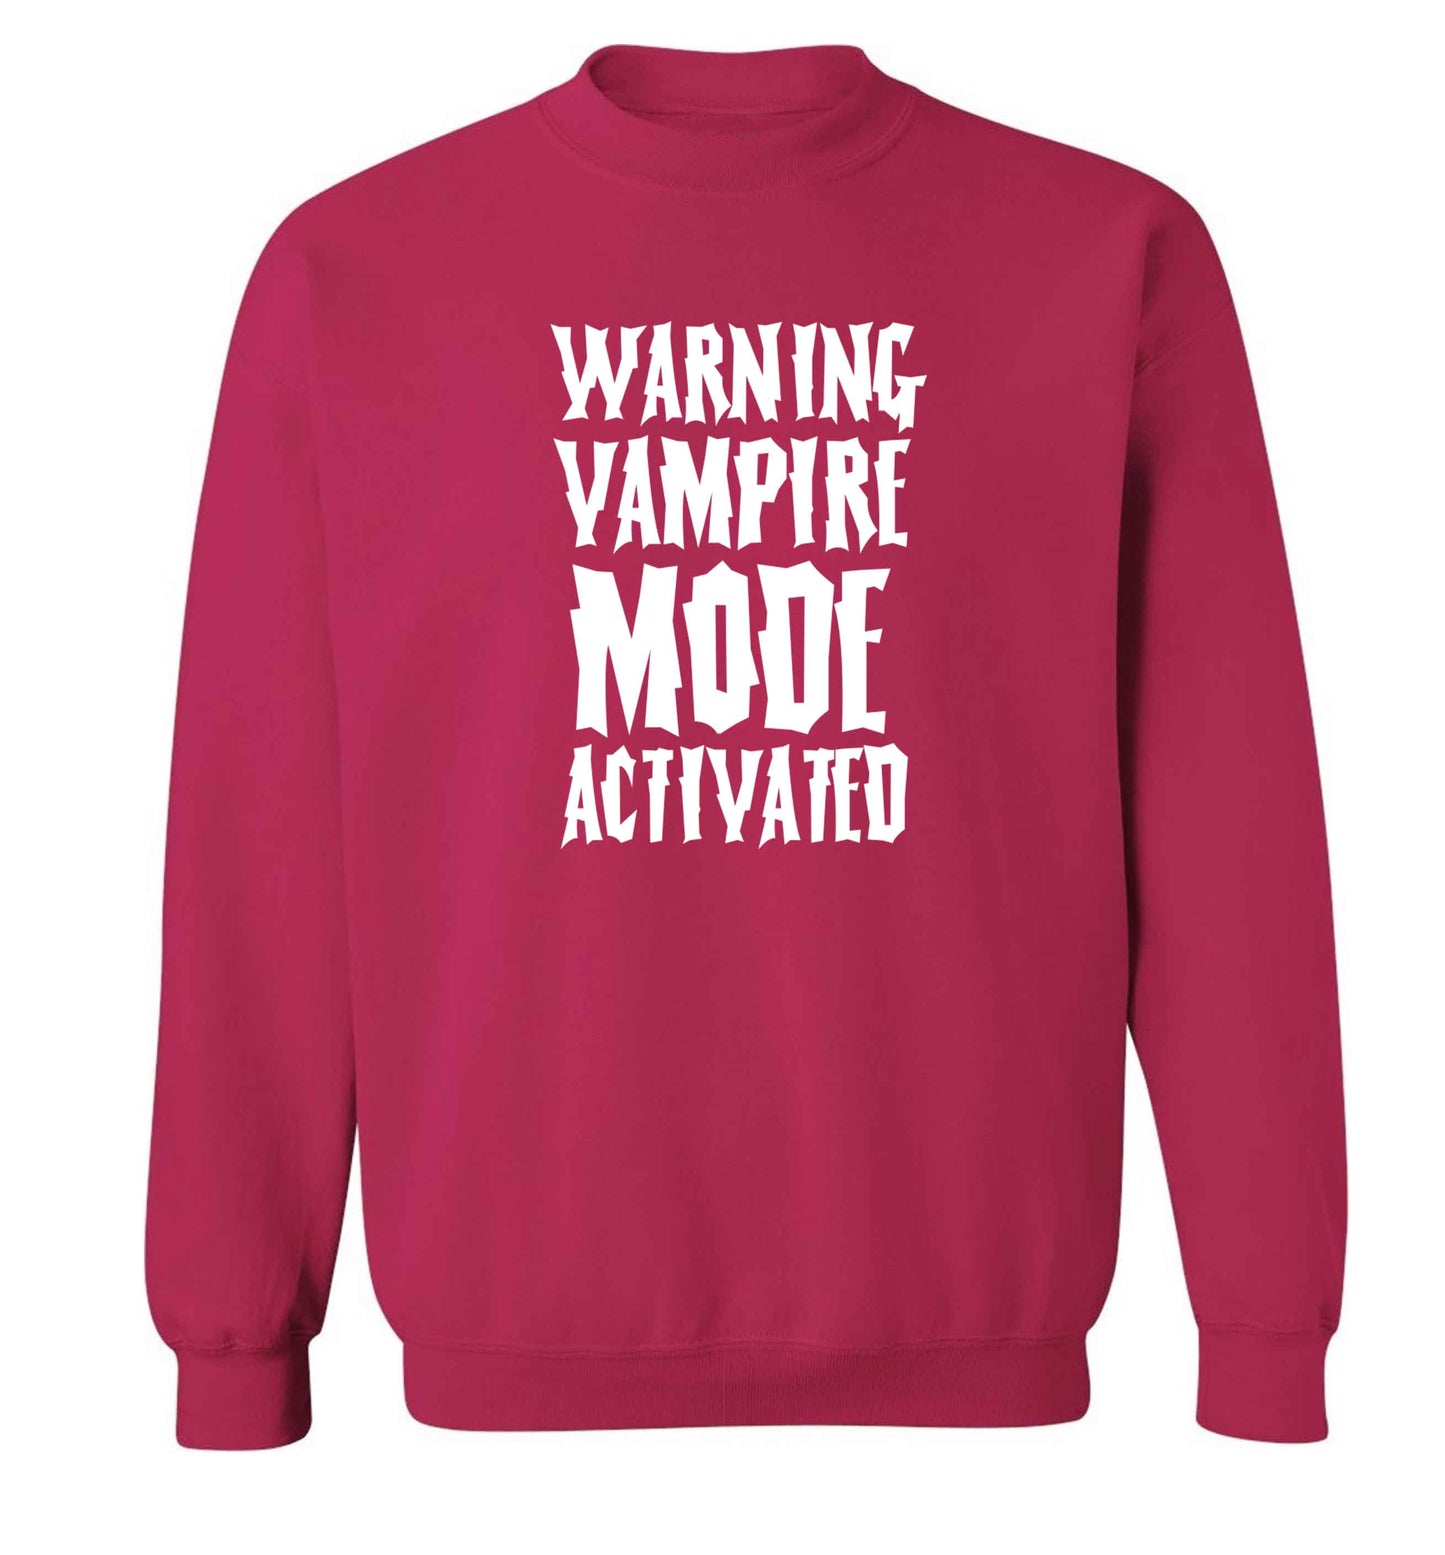 Warning vampire mode activated adult's unisex pink sweater 2XL